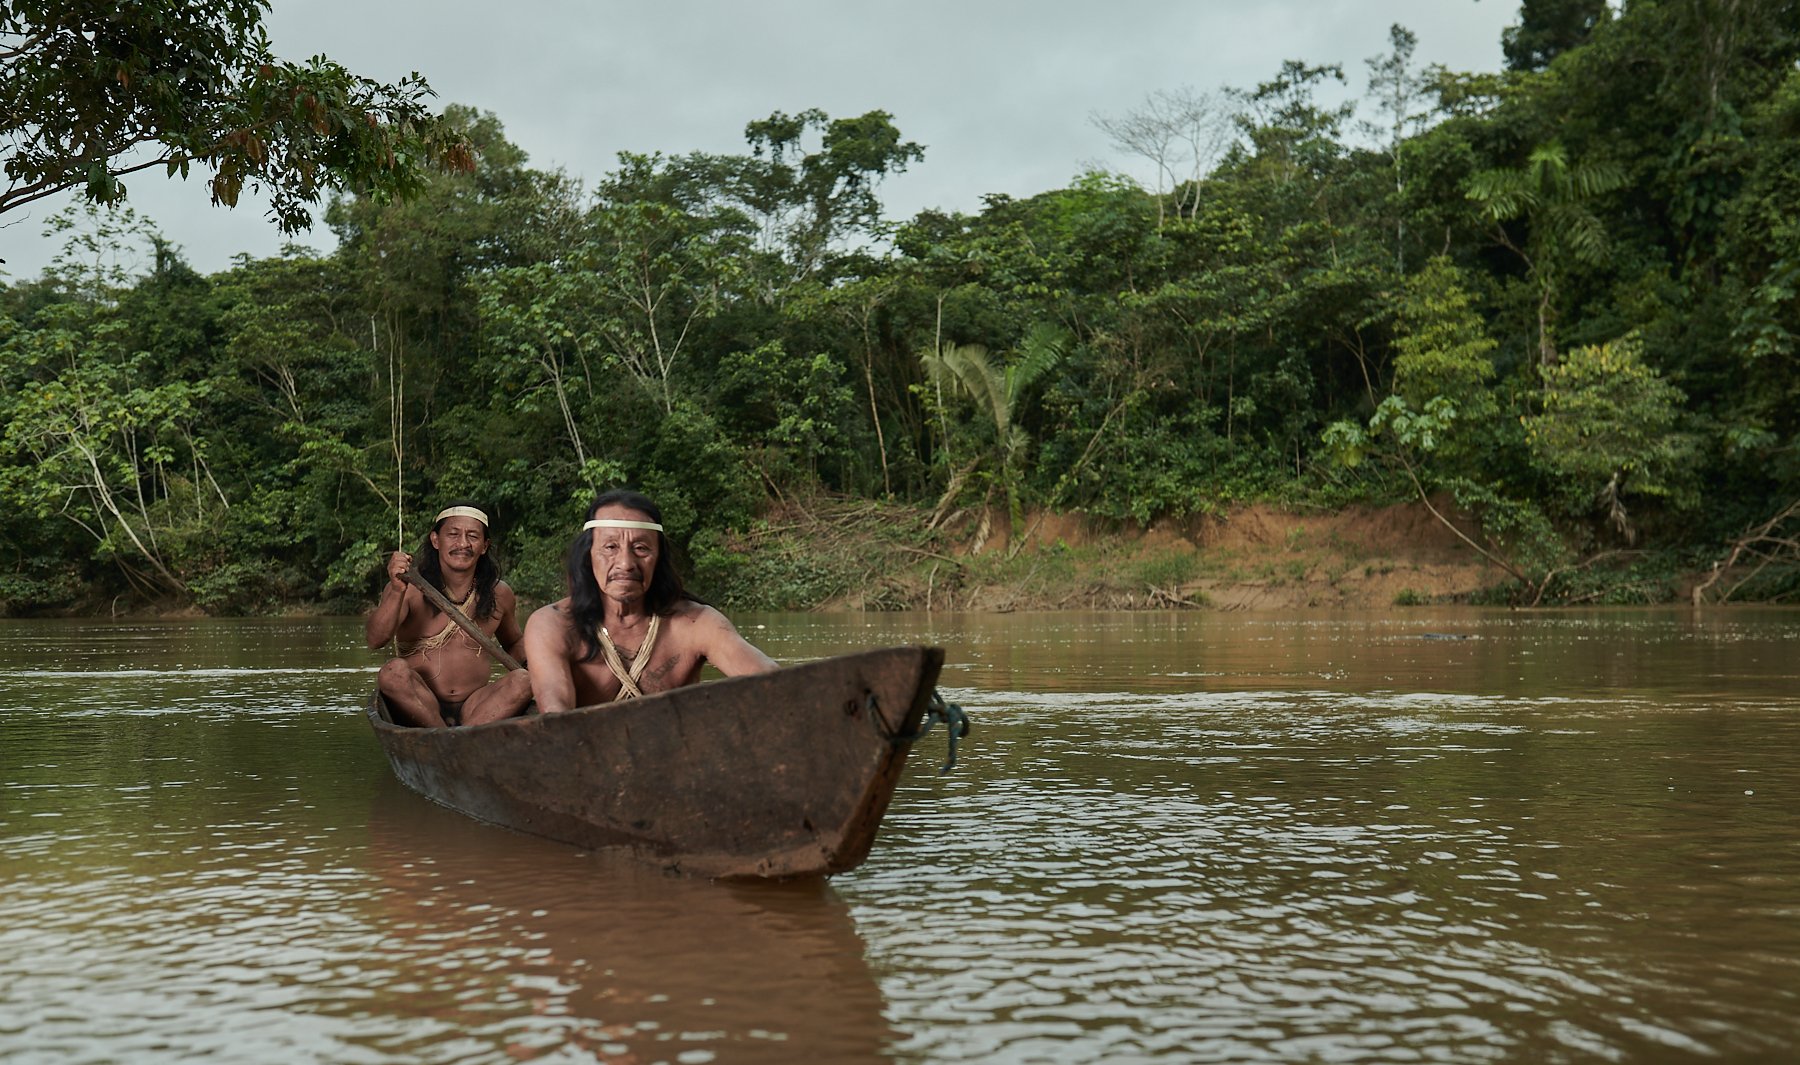 While most Huaorani now use fibreglass-covered long boats, for short trips, they still use traditional wooden canoes